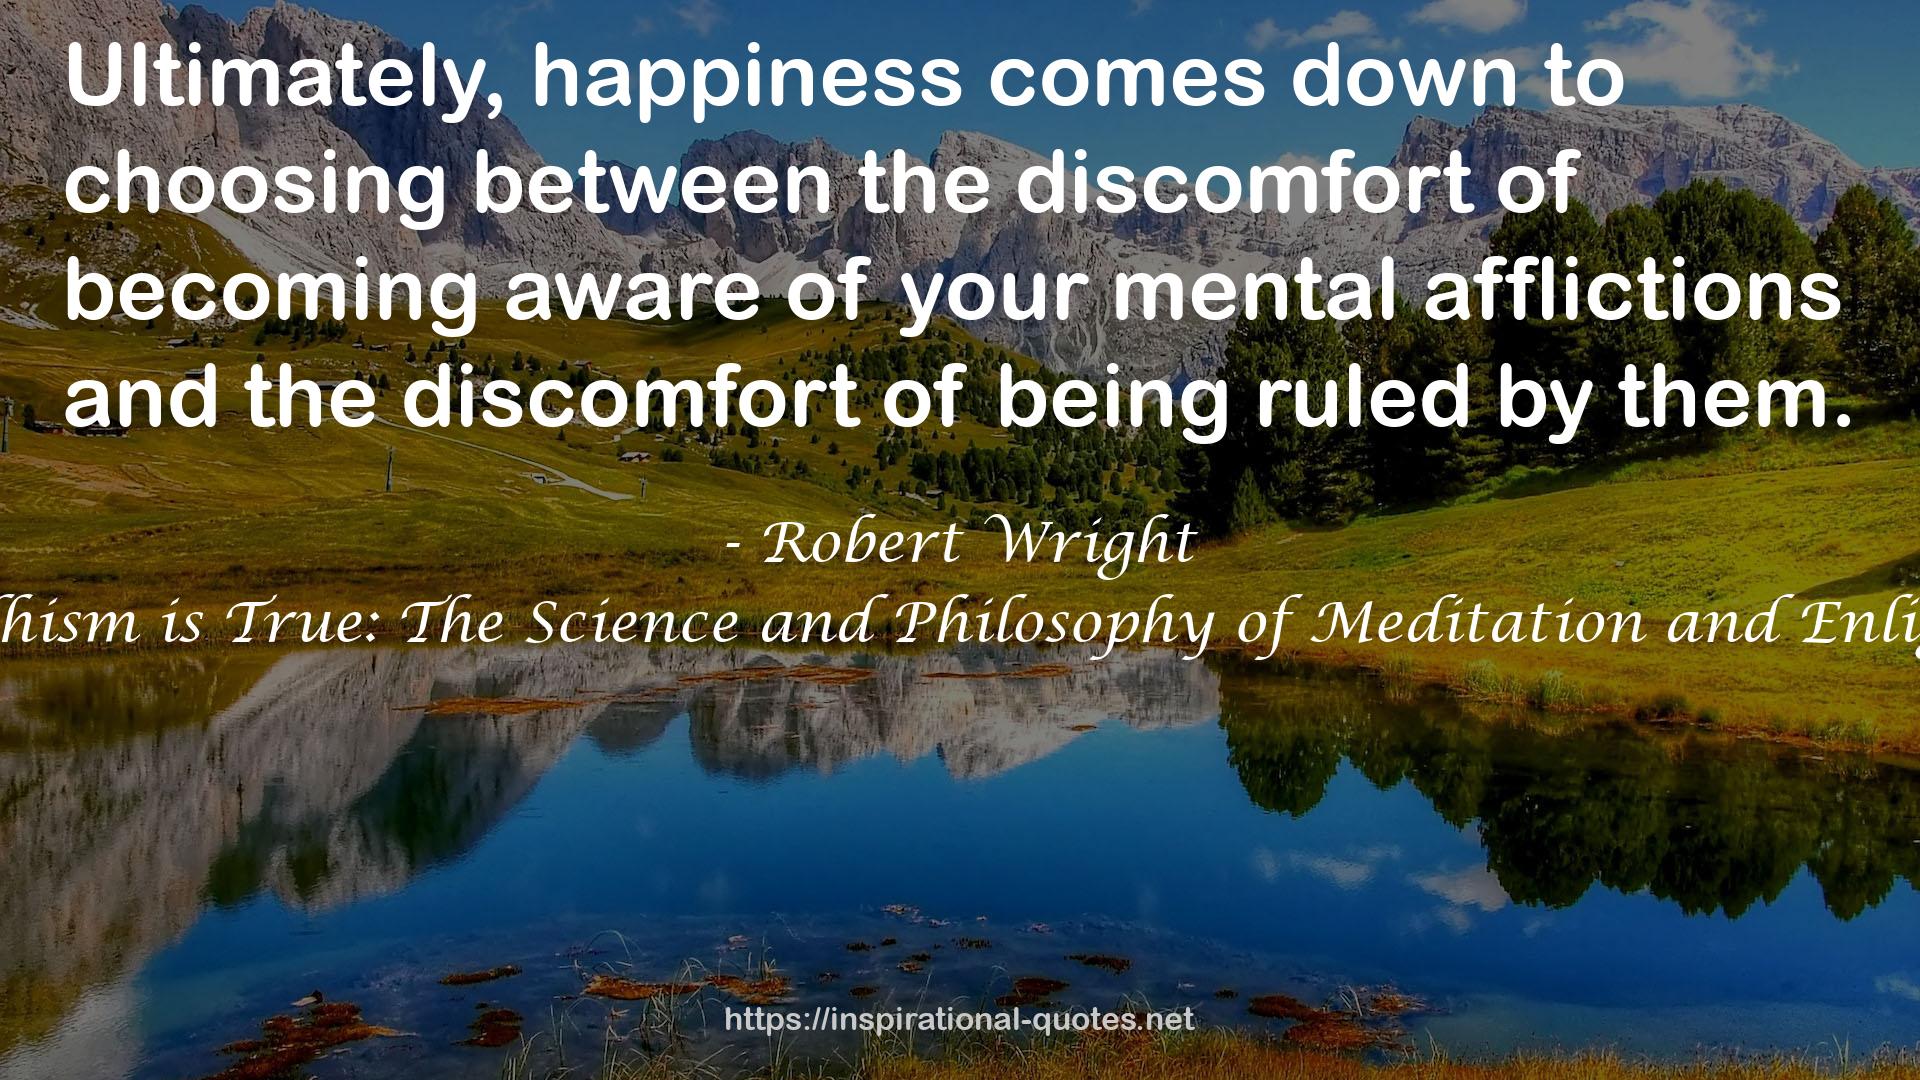 Robert Wright QUOTES